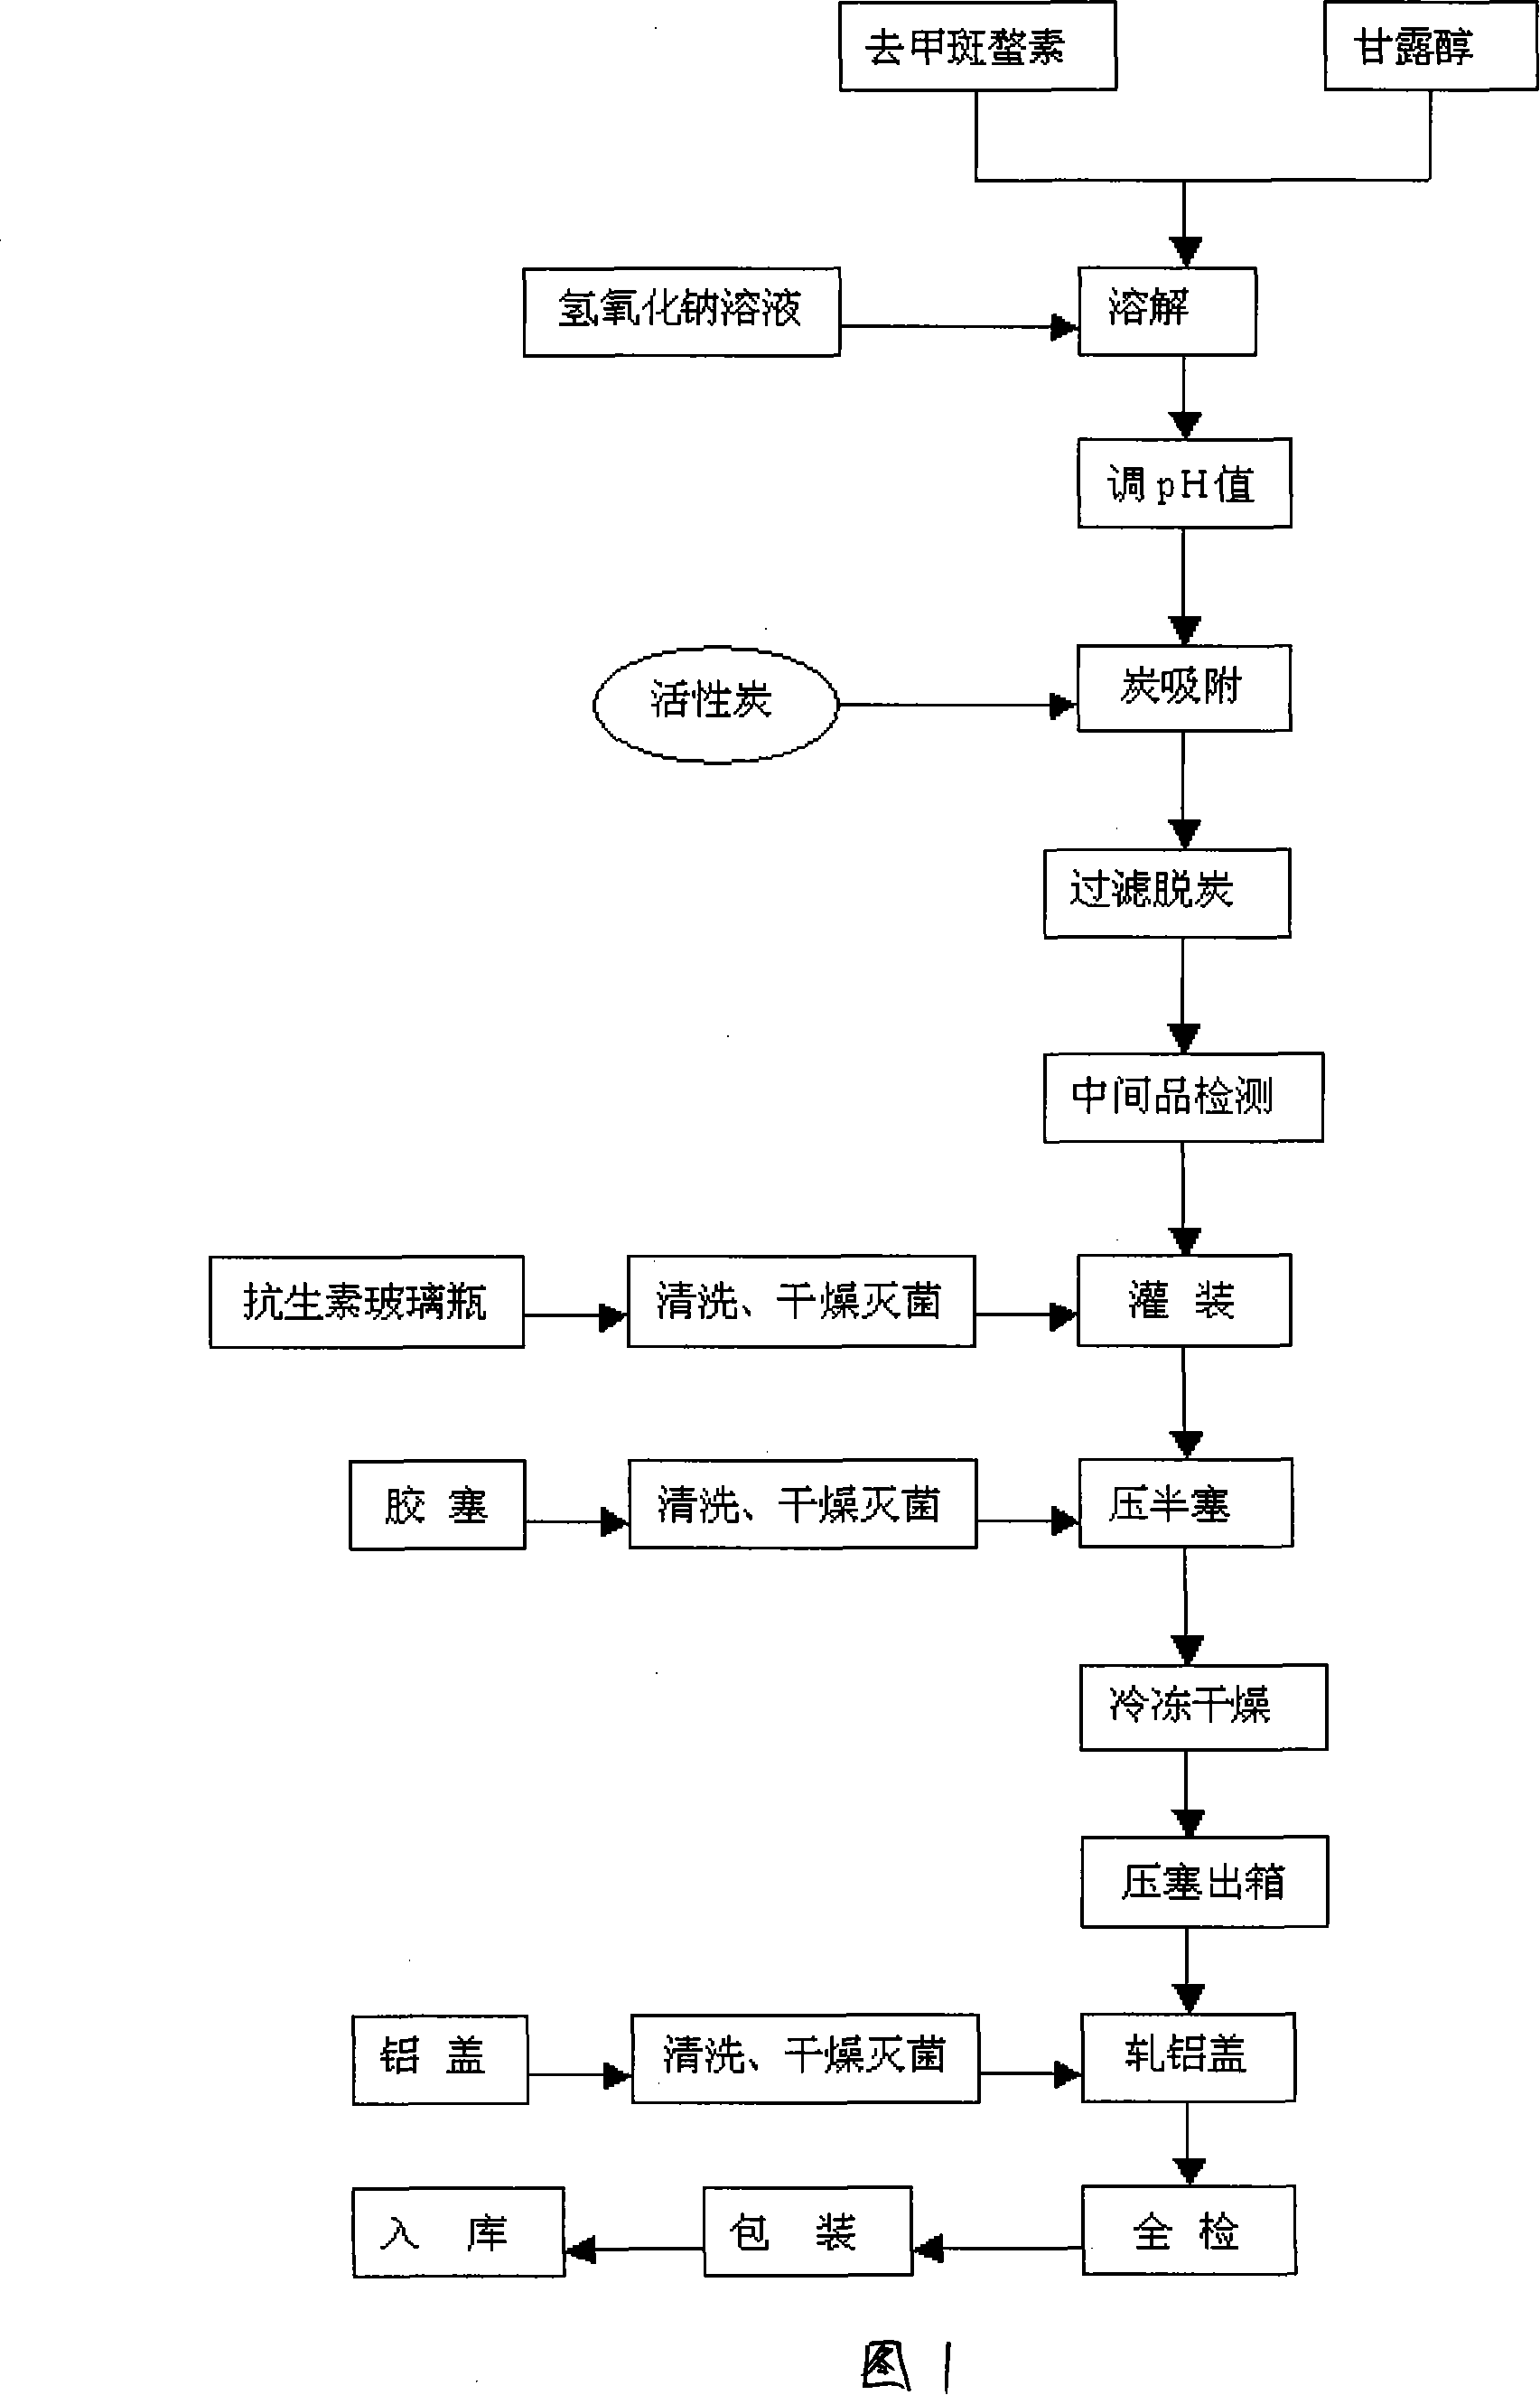 Injectio natarii norcantharidatis freeze-dried powder for injection and preparing method thereof